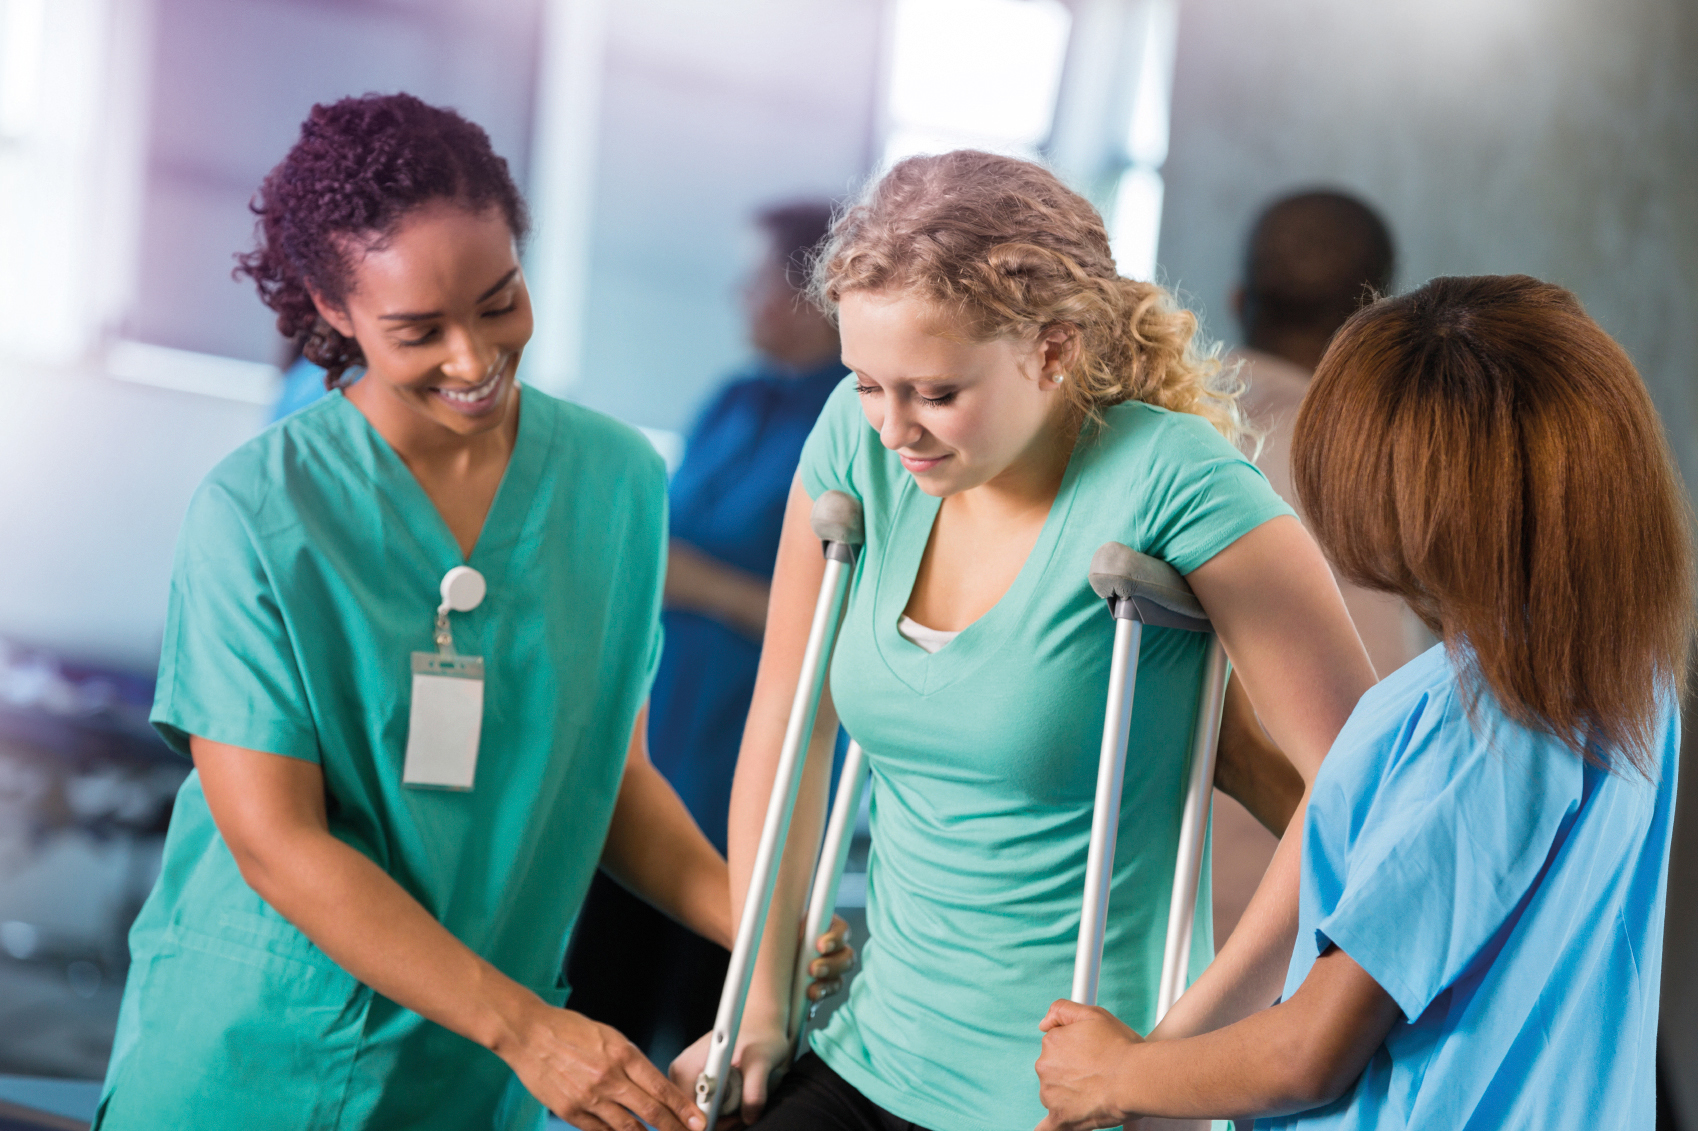 Injured woman is supported by nurses while trying her crutches